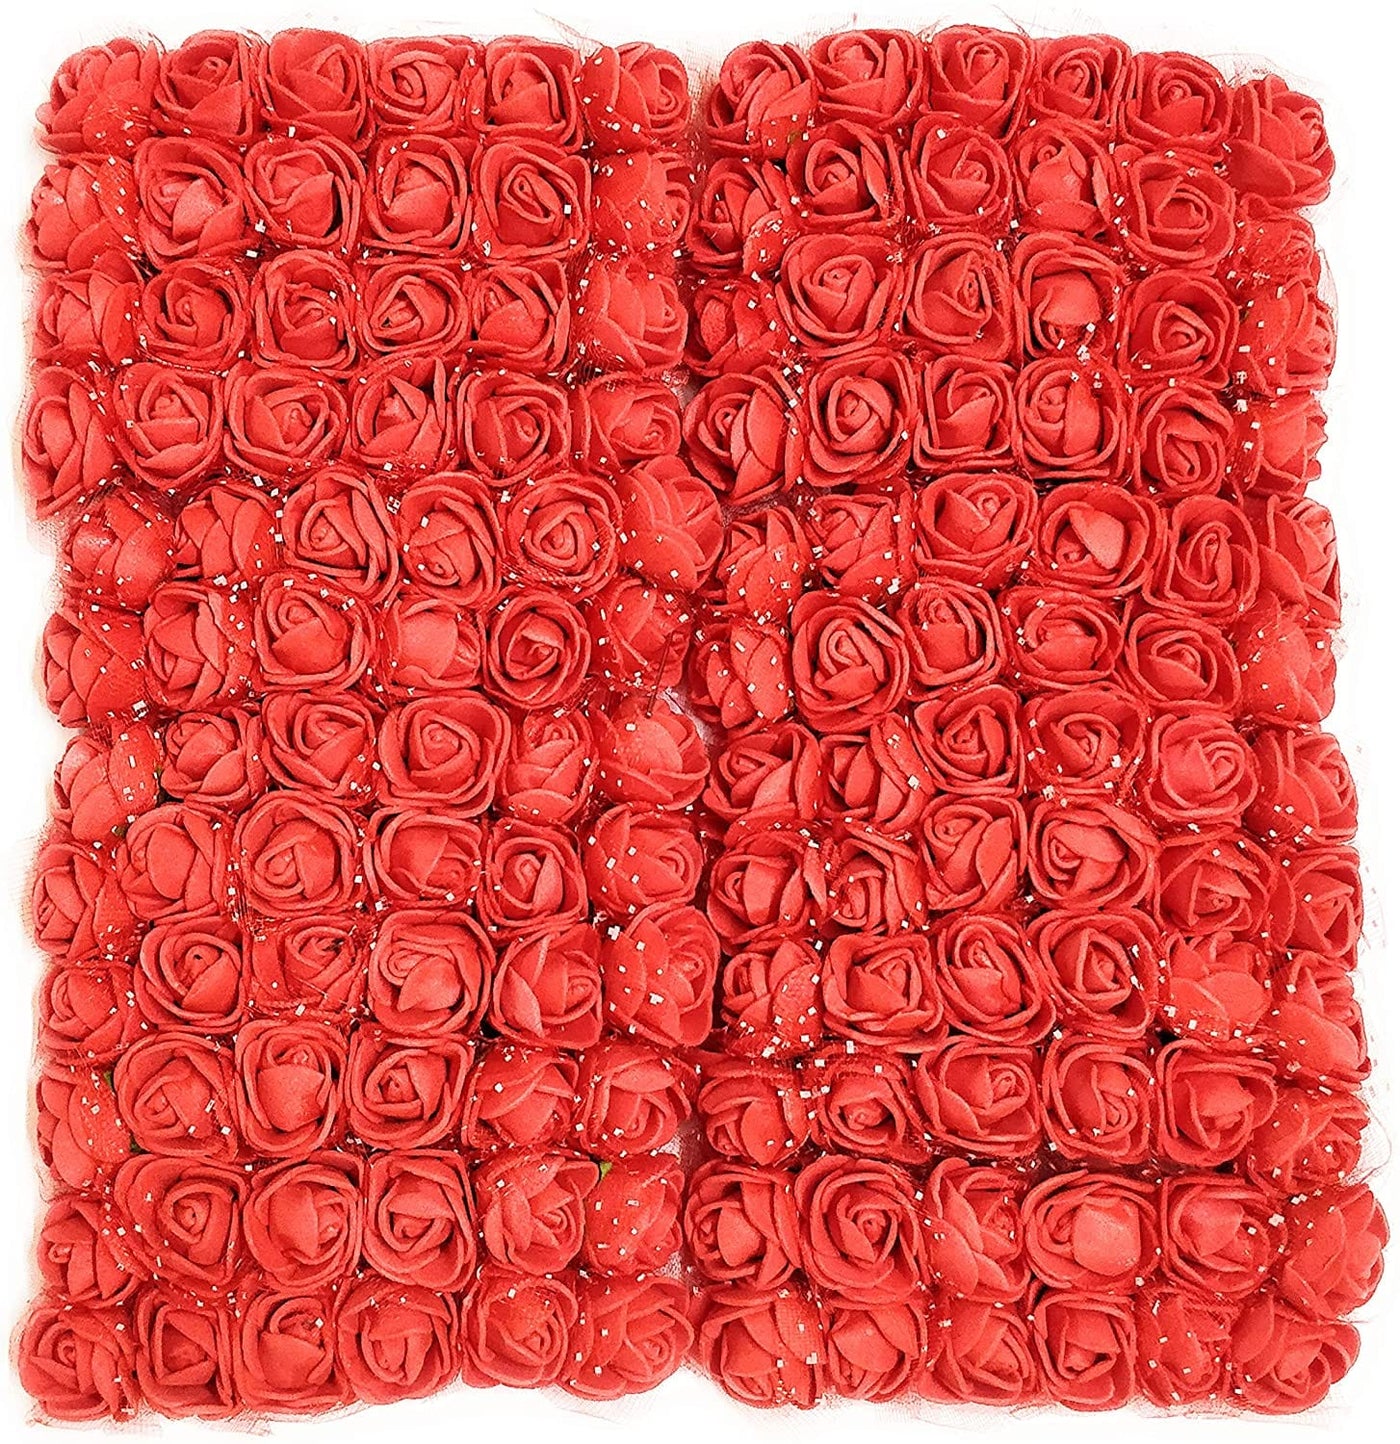 Lamansh Raw materials for Flower jewellery Red / 1 Packet ( 144 Flowers ) Red mini foam Flowers Pack of (144) Artificial foam Flowers / Raw materials for Flower jewellery & other products / Pack of 144 flowers